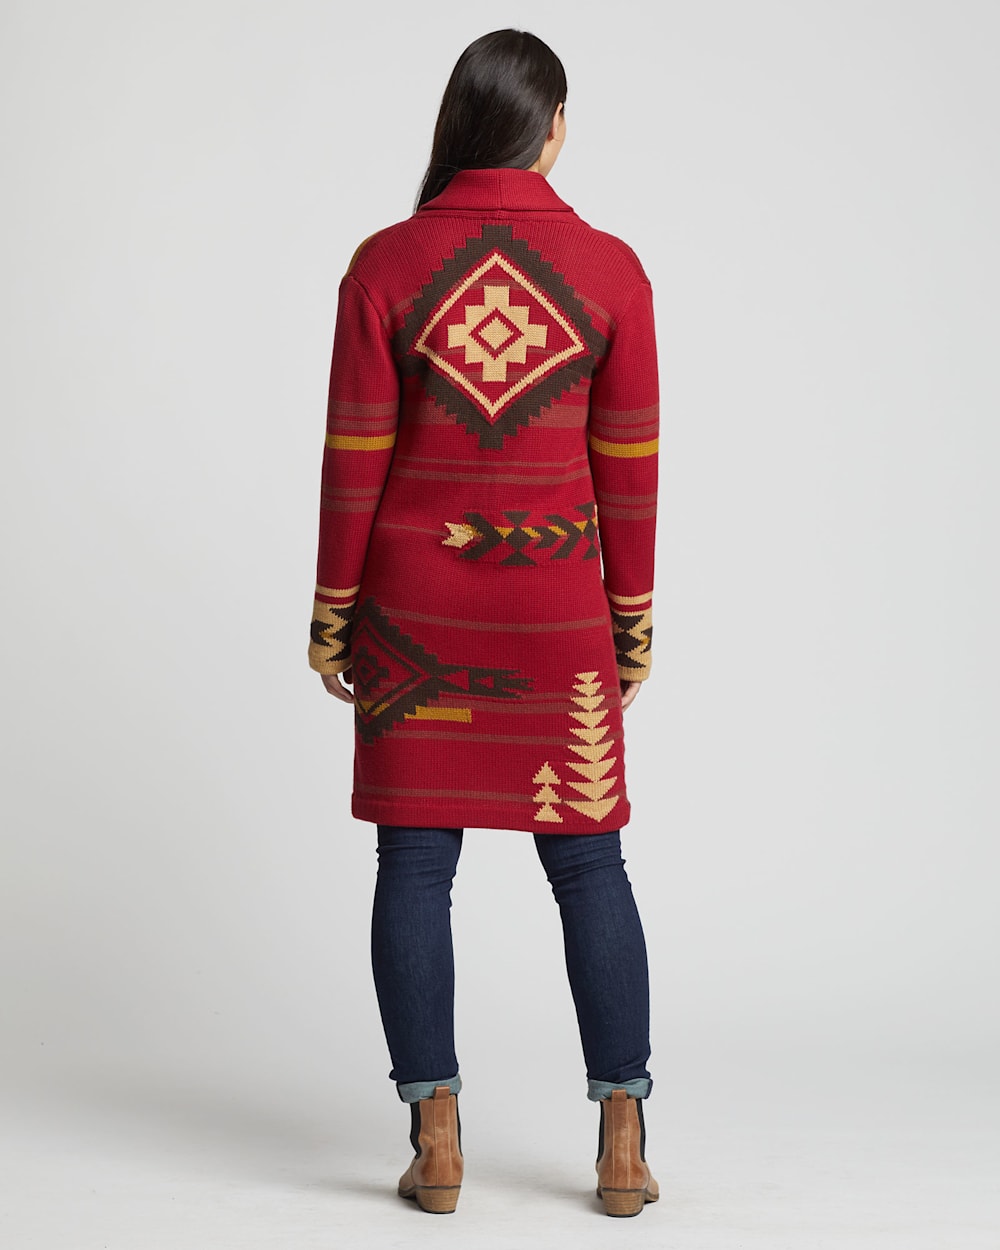 ALTERNATE VIEW OF WOMEN'S GRAPHIC SWEATER COAT IN ROSEWOOD MULTI image number 3